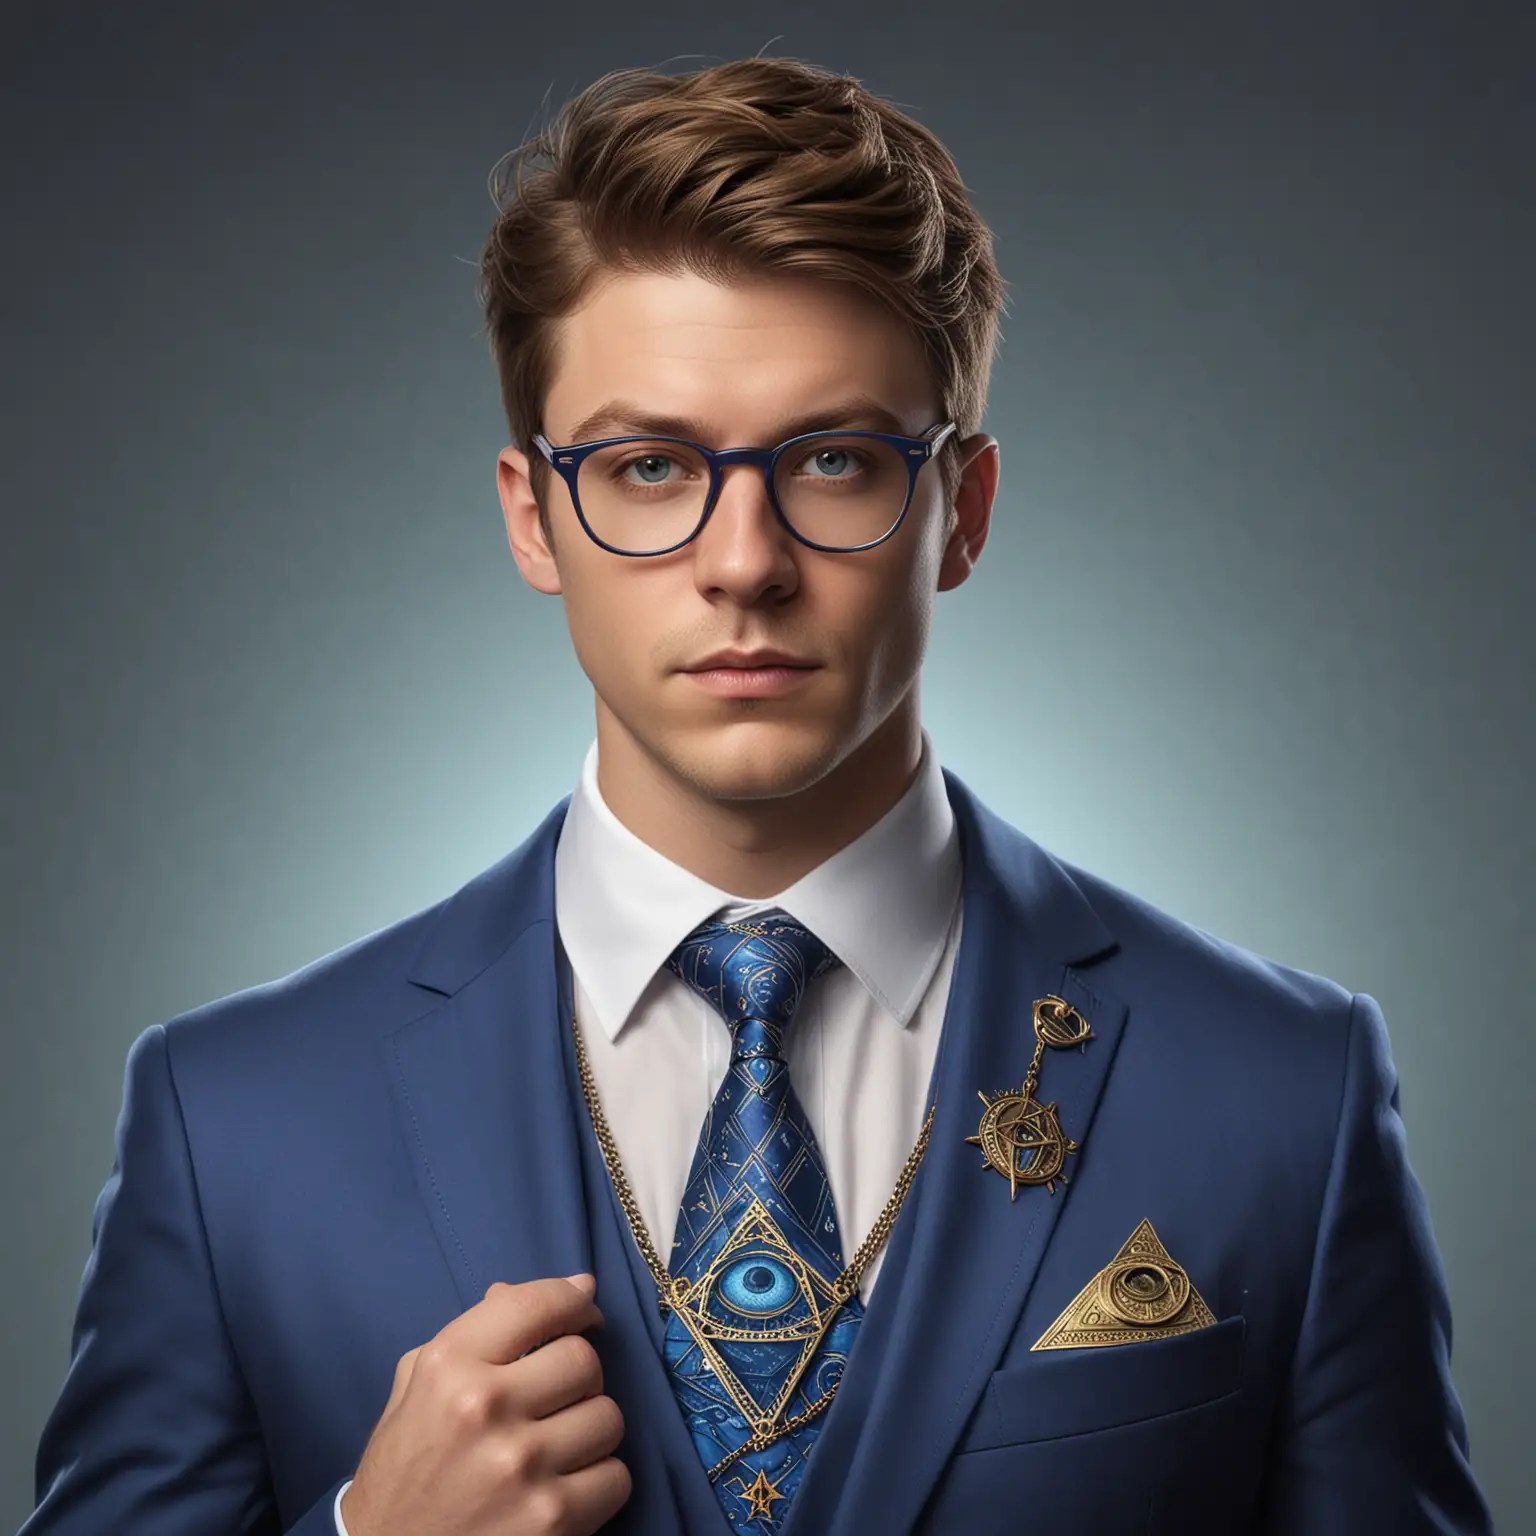 A white male, geeky, portrait image, wearing a blue suit, illuminati necklace, glasses, realistic